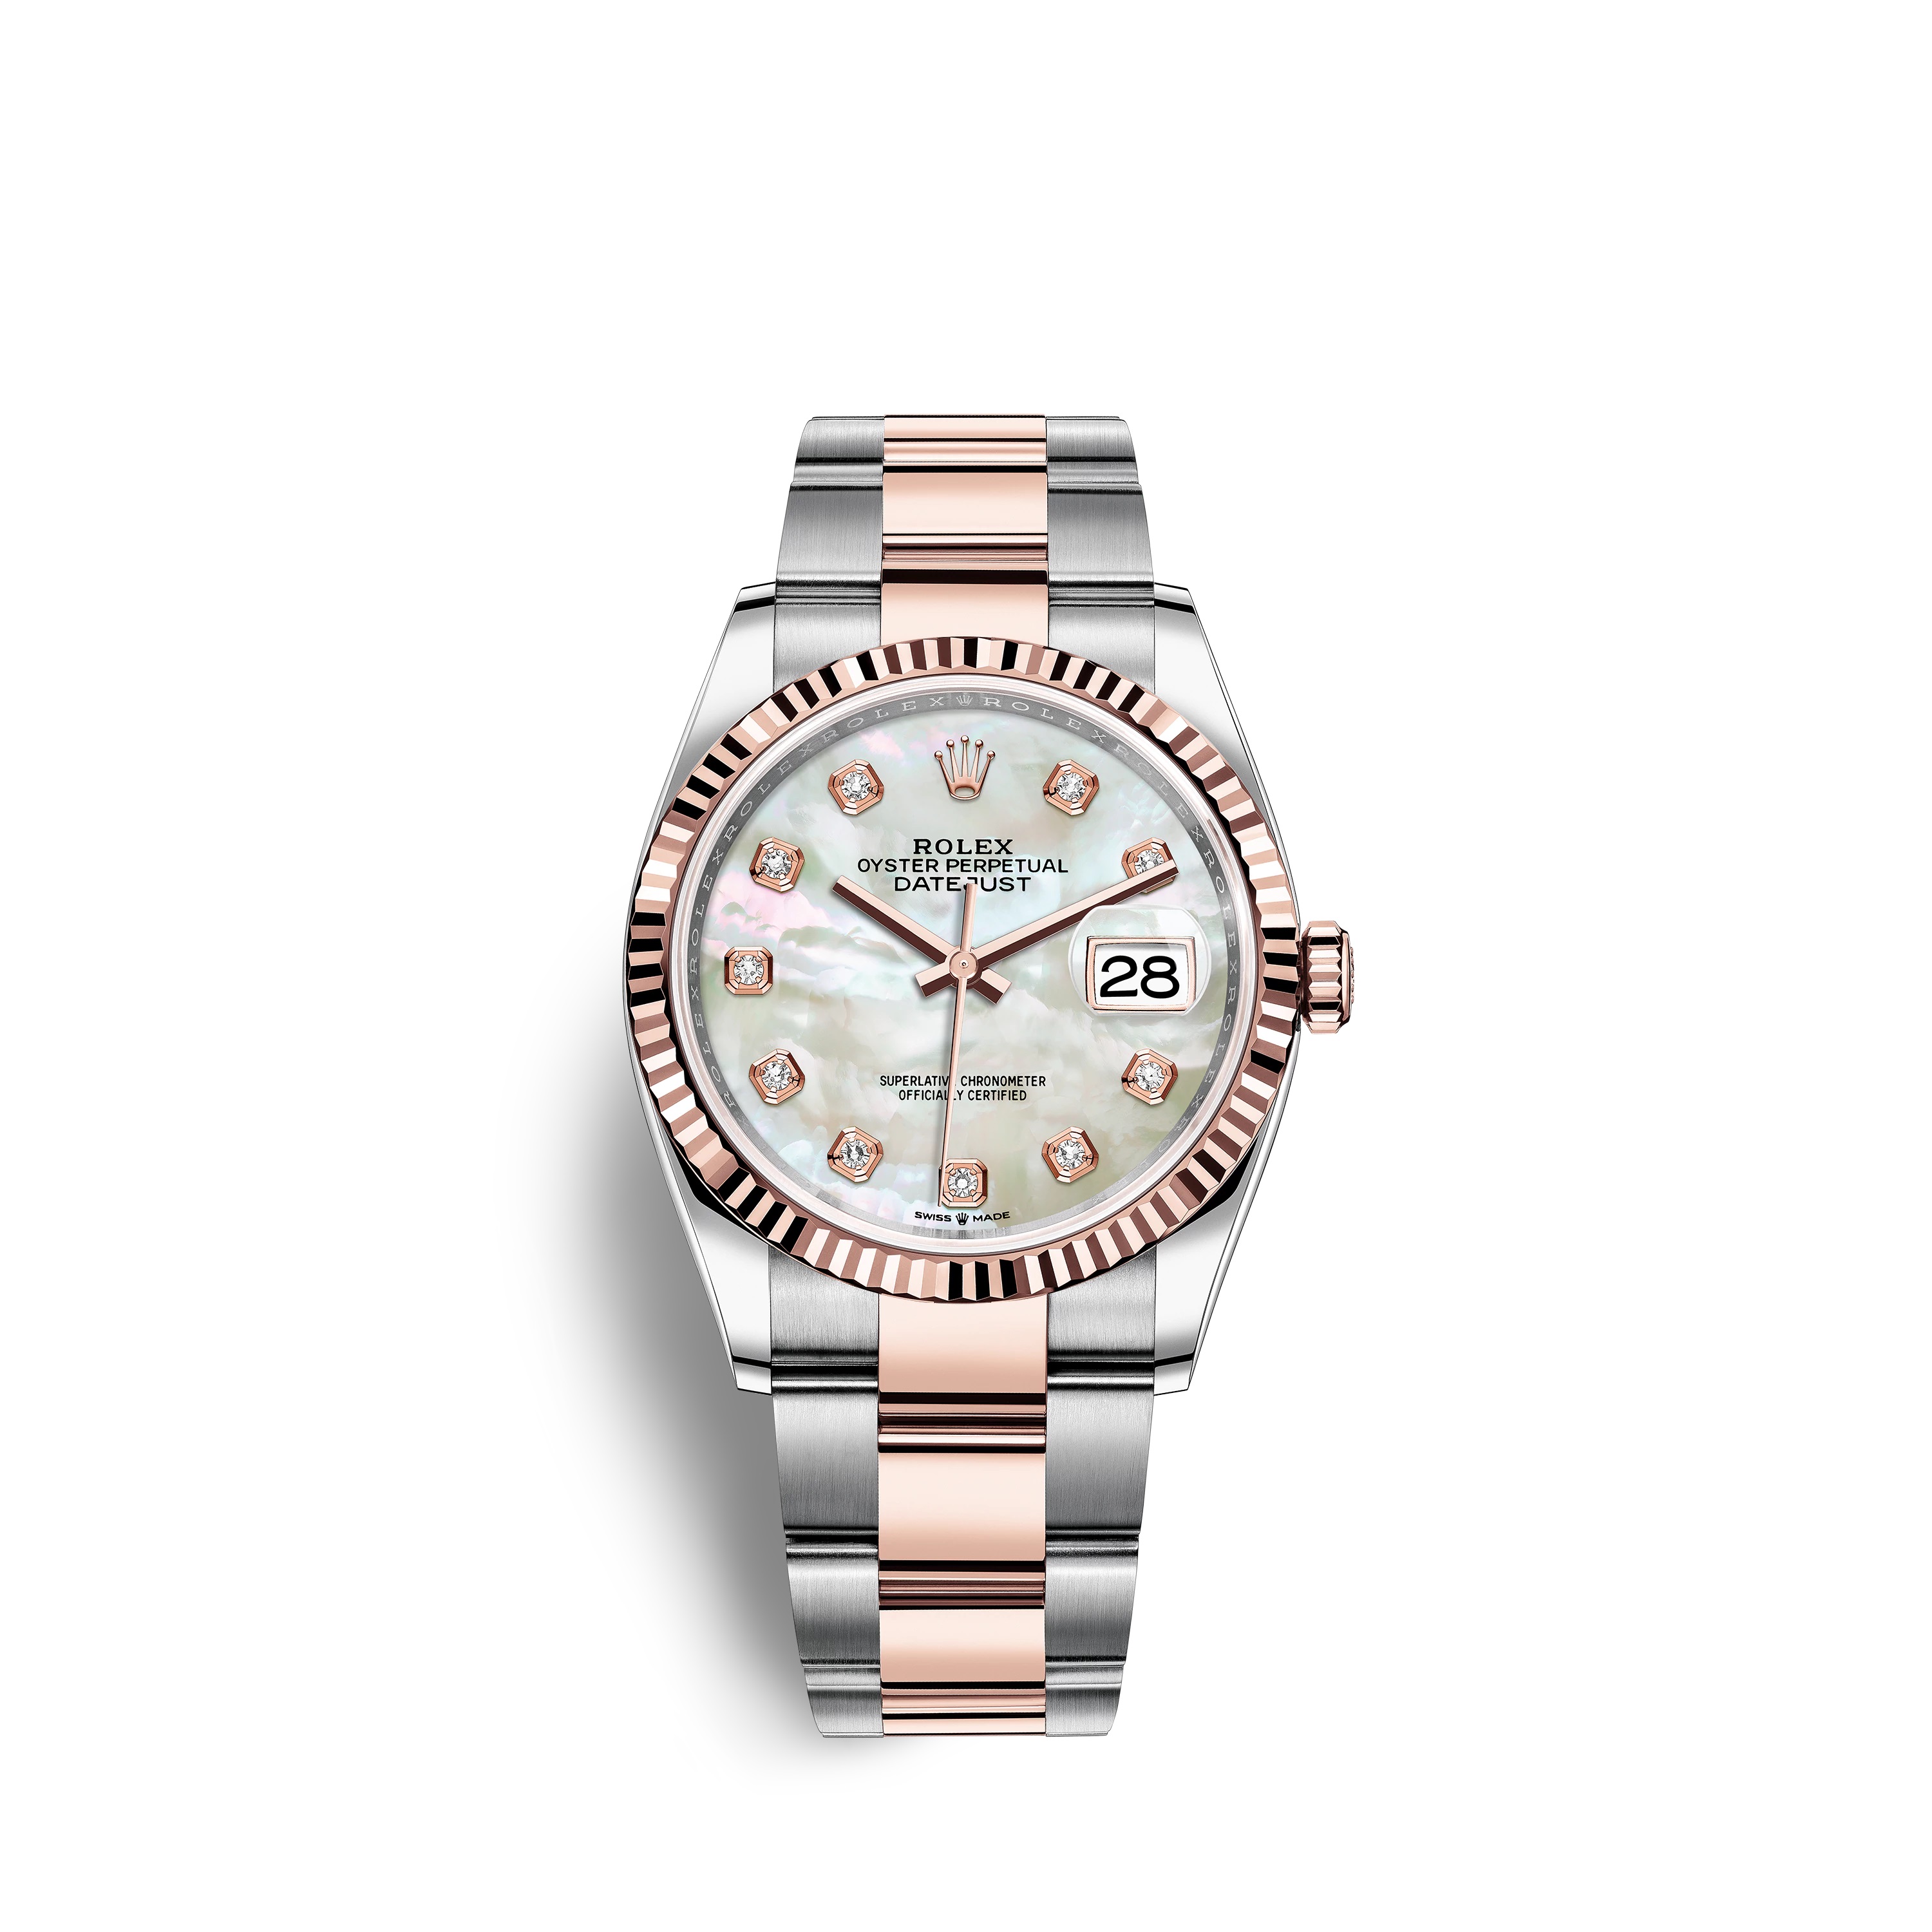 Datejust 36 126231 Rose Gold & Stainless Steel Watch (White Mother-of-Pearl Set with Diamonds)